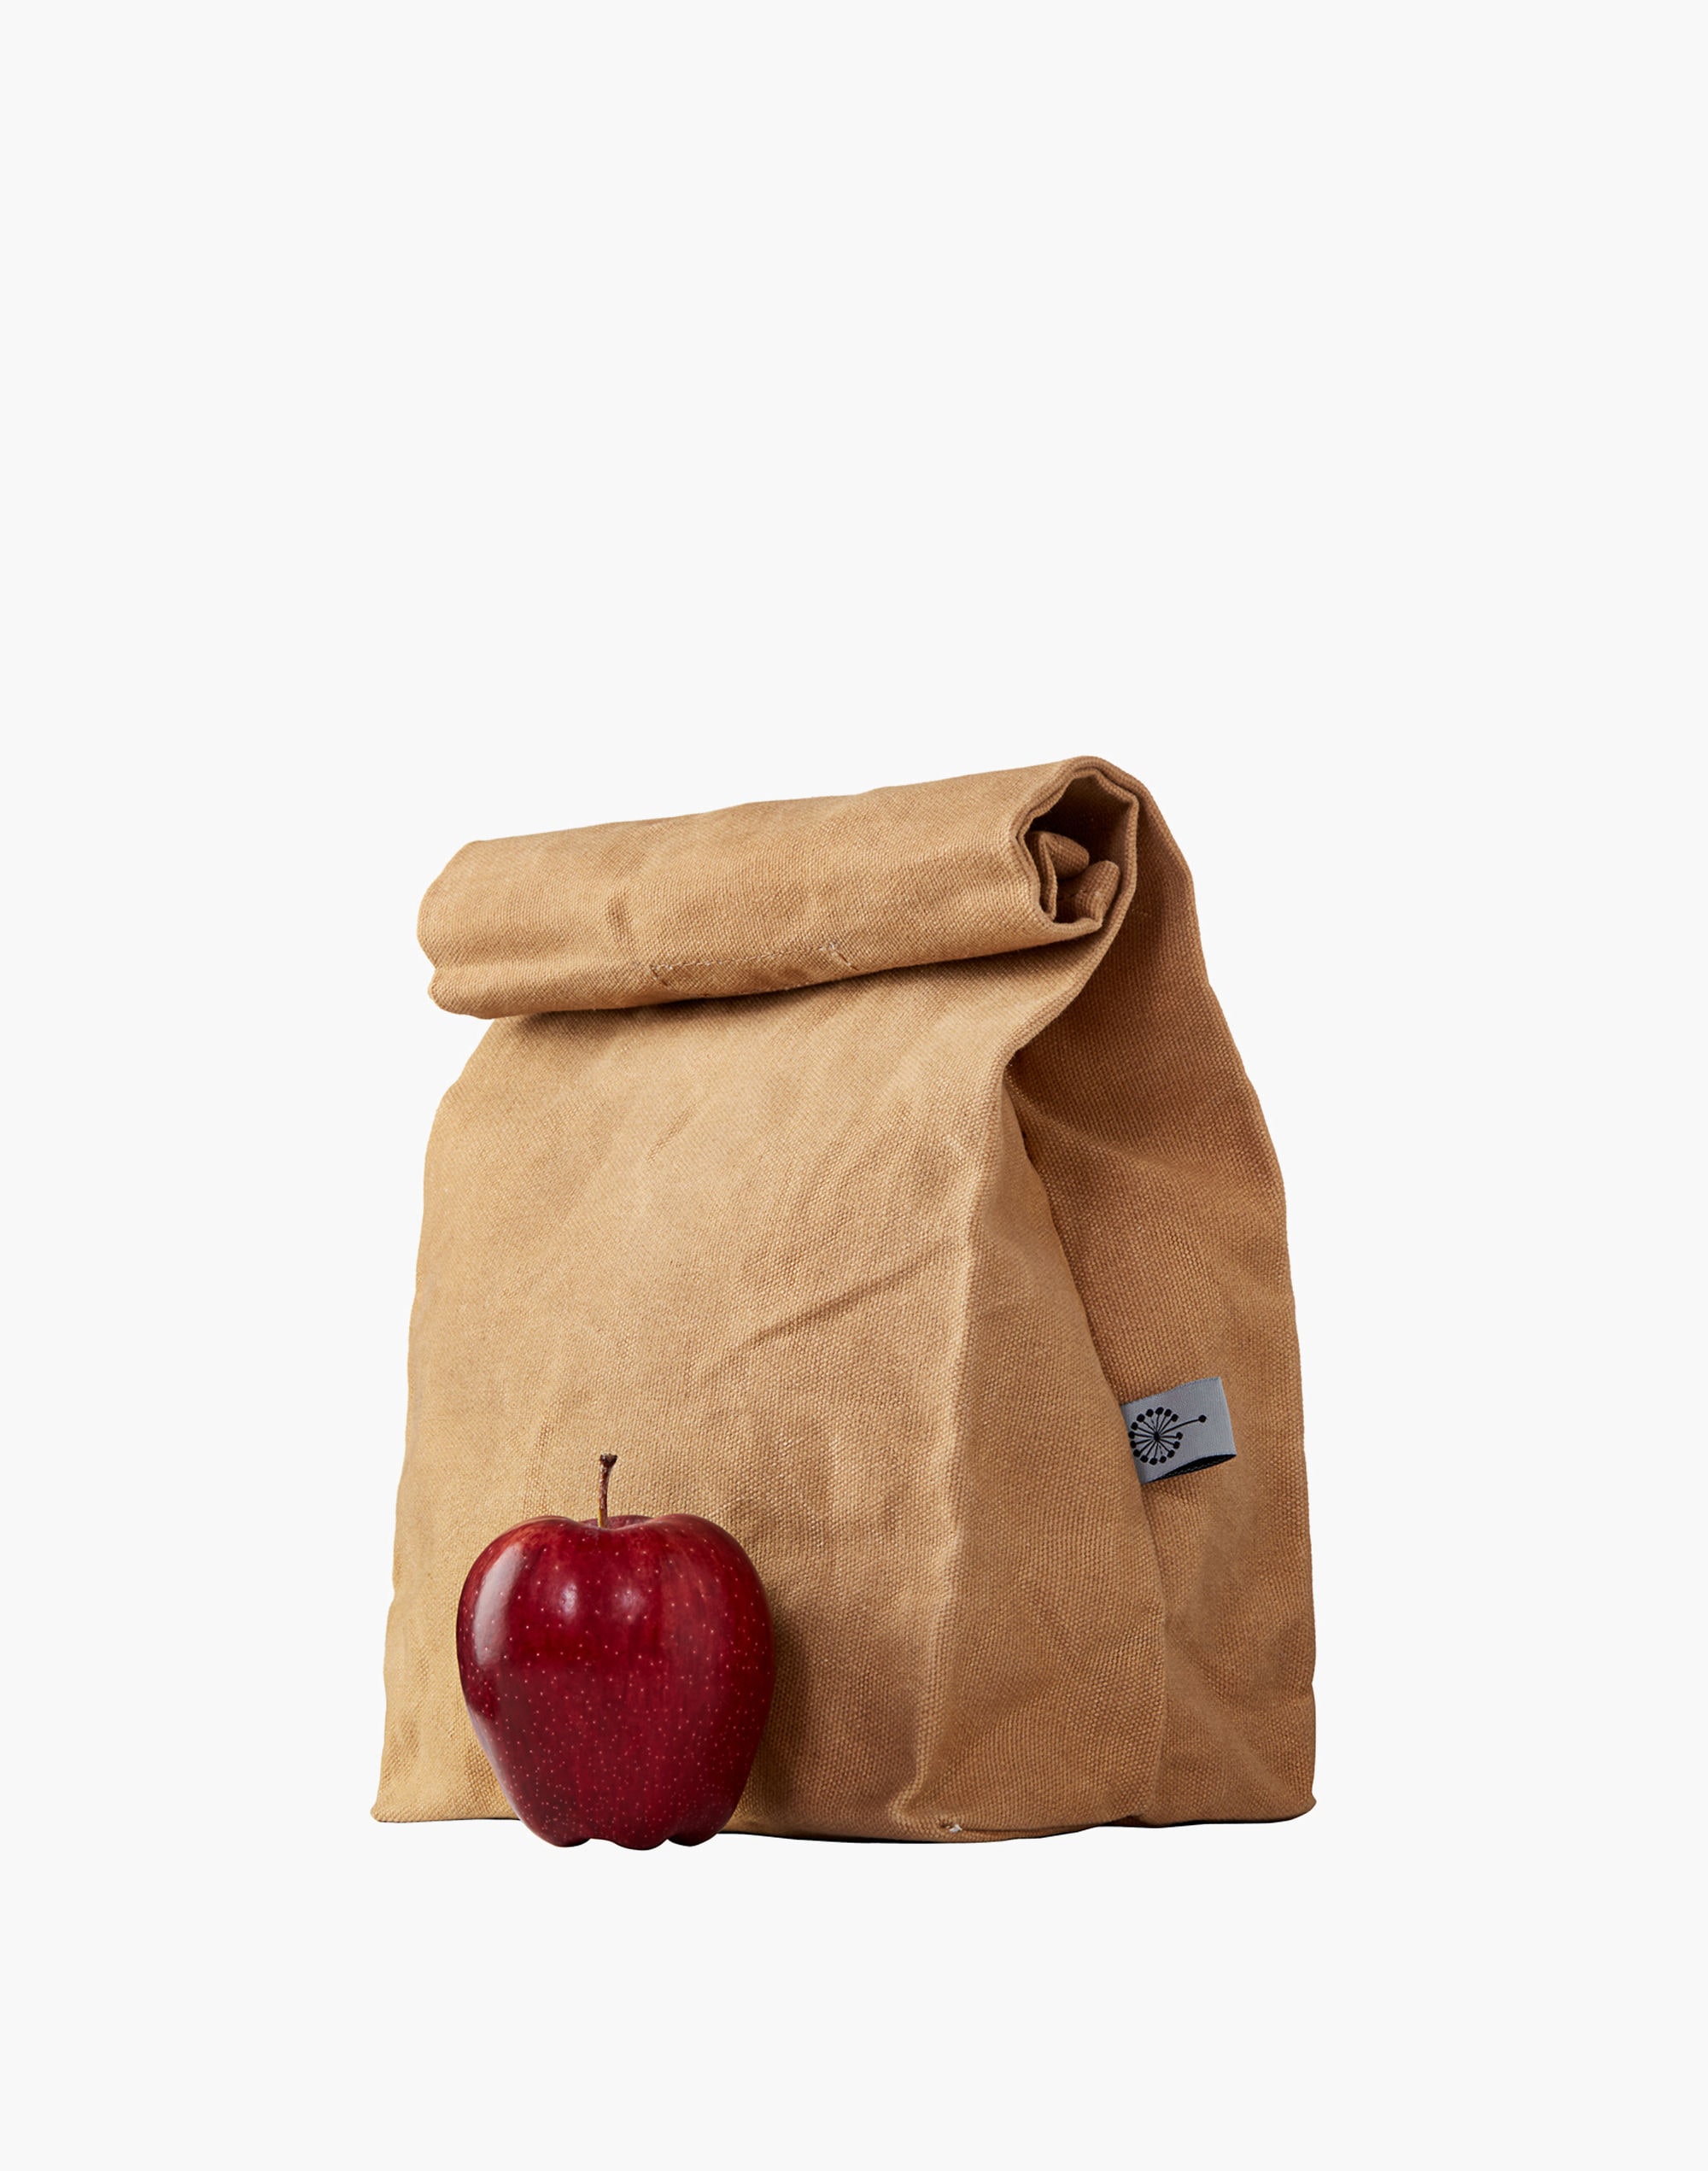  The Original Waxed Canvas Lunch Bag, Handmade with Certified  Organic Cotton and Hand Waxed with Beeswax, Foldable, Stiff Material,  Plastic-Free, Reusable, GOTS, Large, For Men, Women, Kids, Brown: Home &  Kitchen